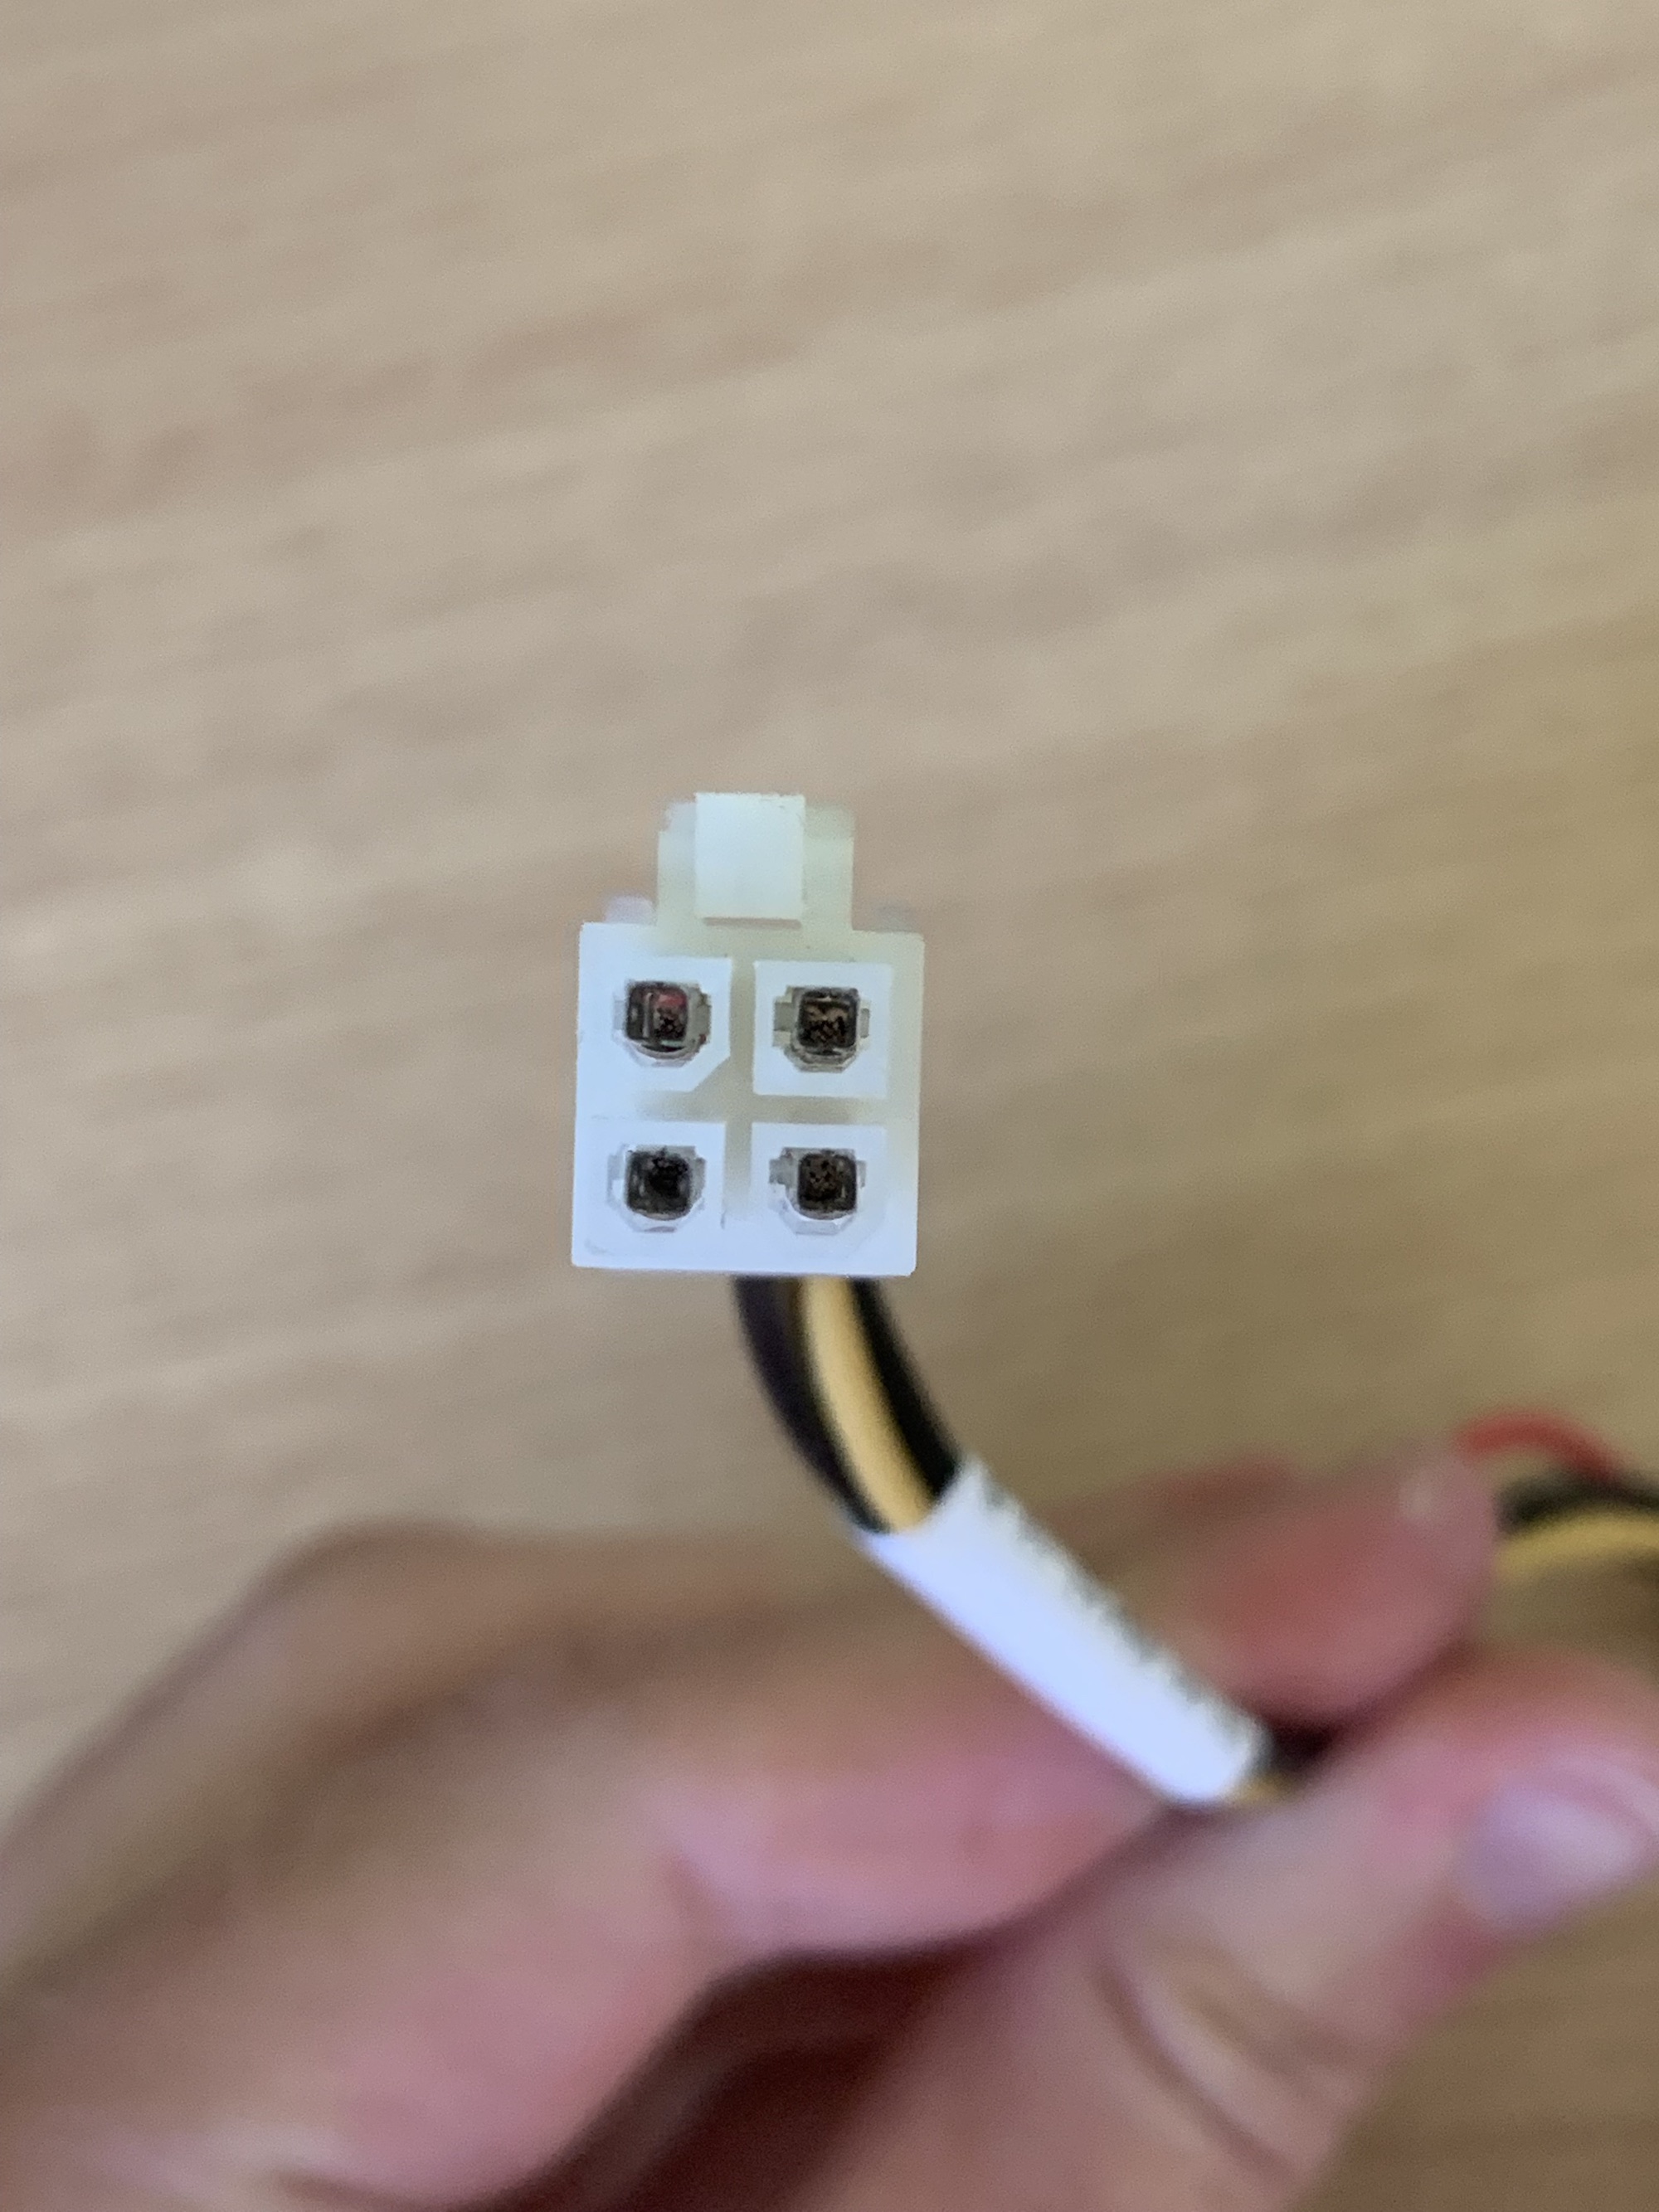 Photo of the special Molex connector